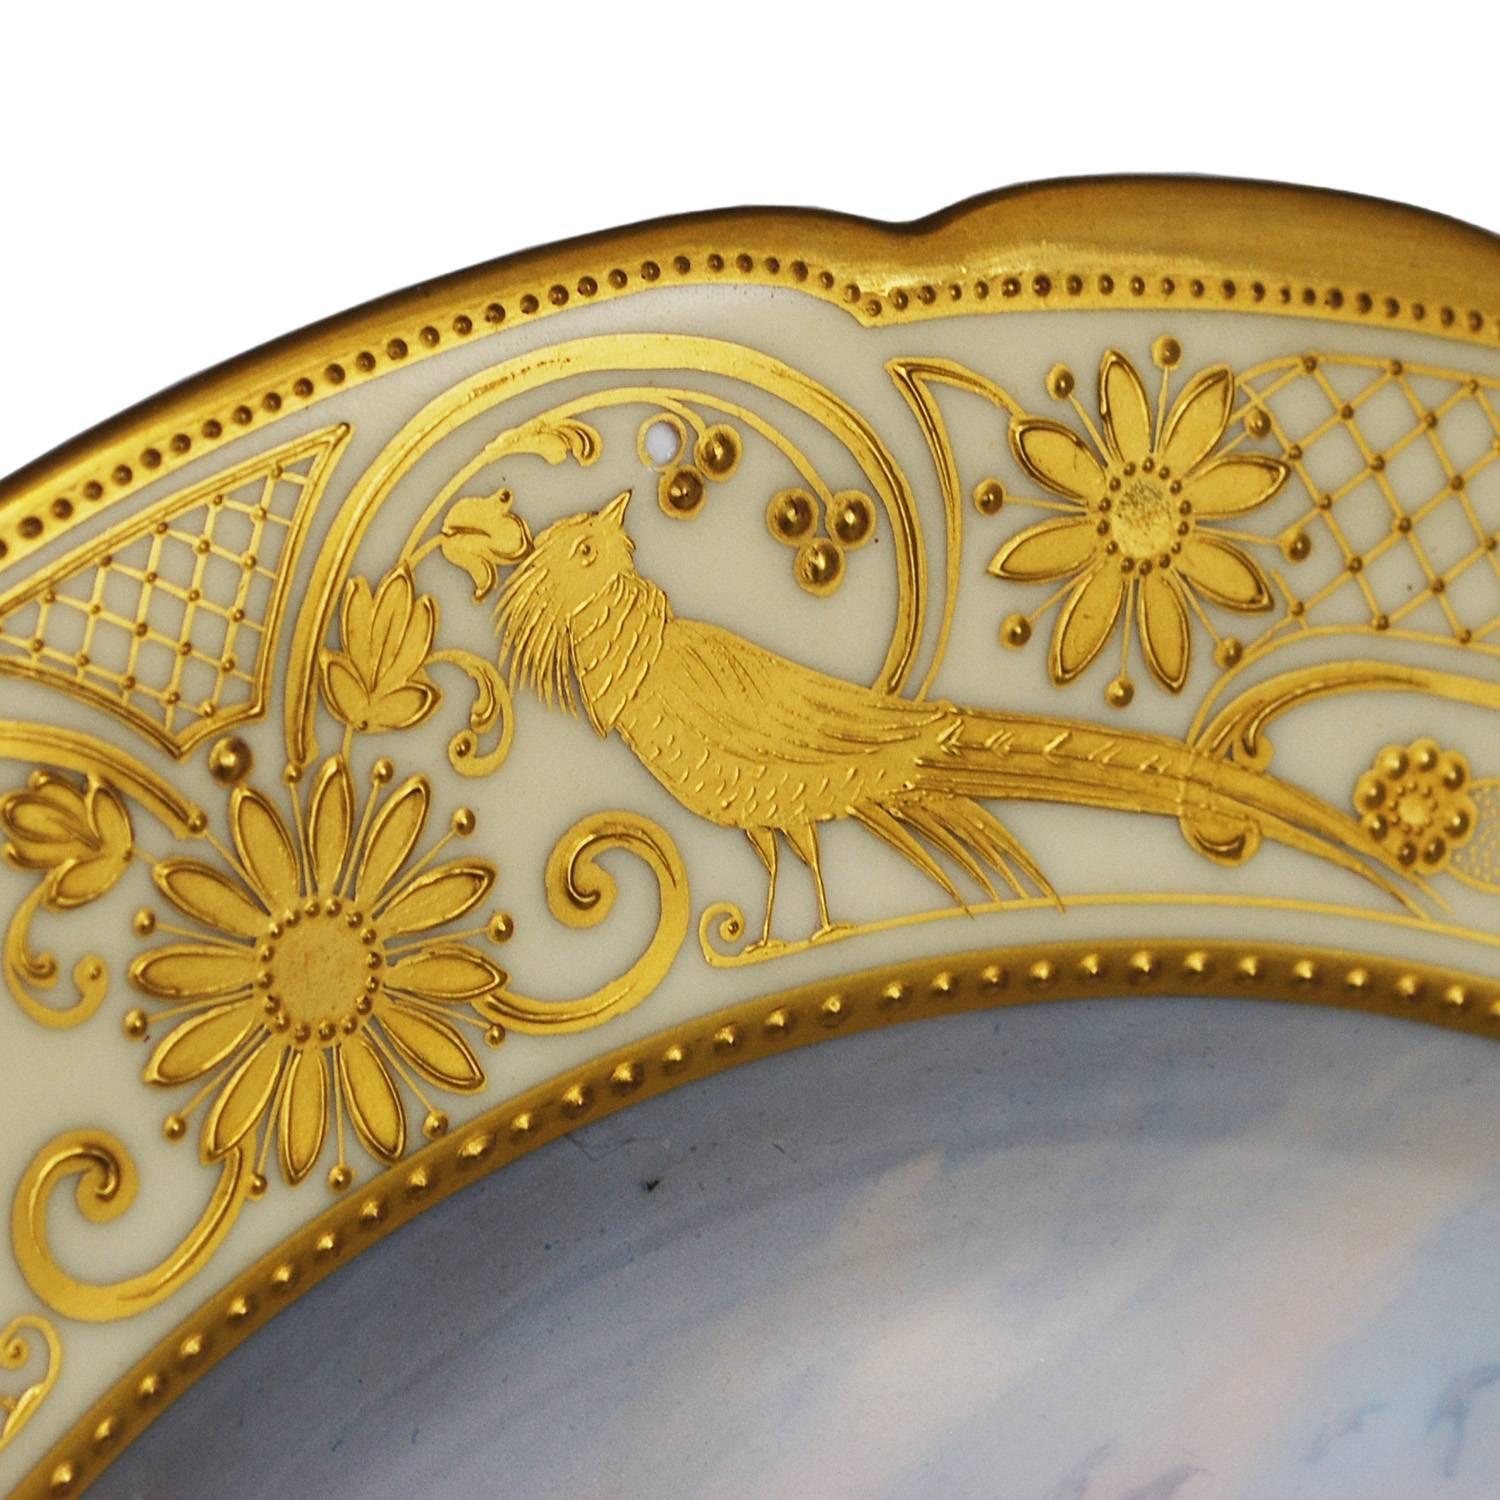 Mid-20th Century Antique Cabinet Game Bird Plate Hand-Painted Gilt Attributed to Lamm Studio